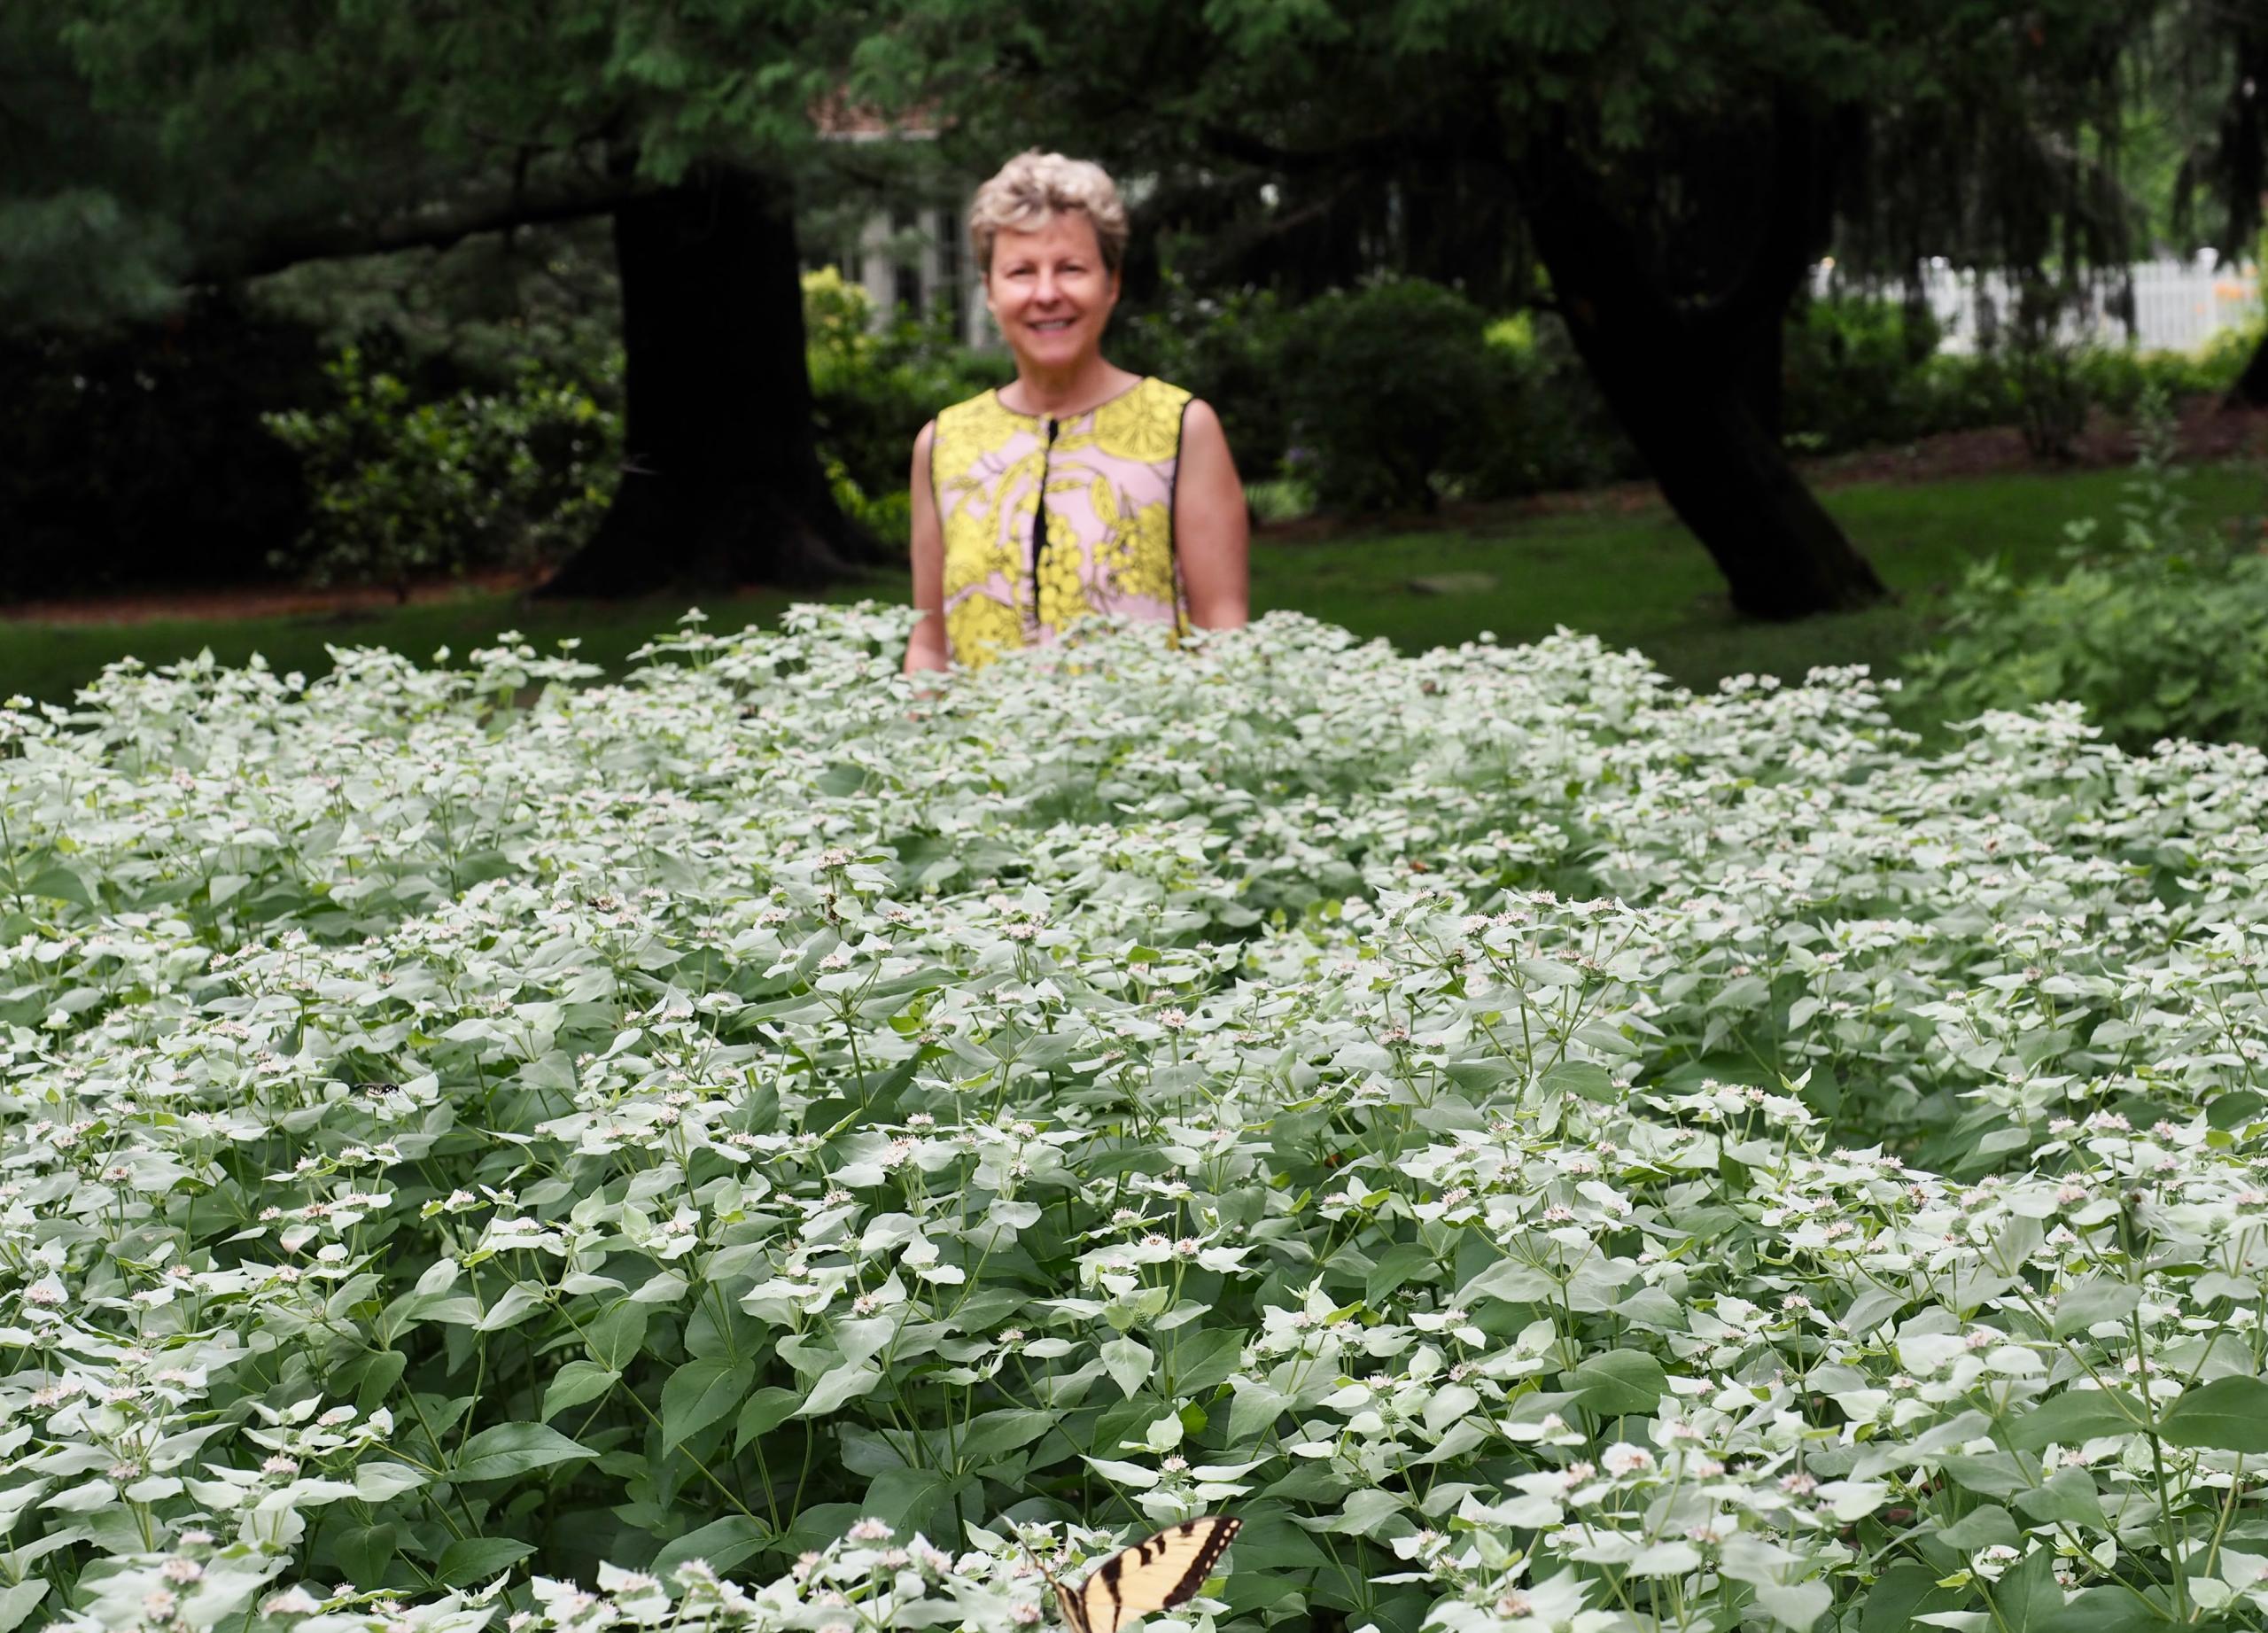 New Jersey Skincare Company's Pollinator Garden Helps Sustain The Environment